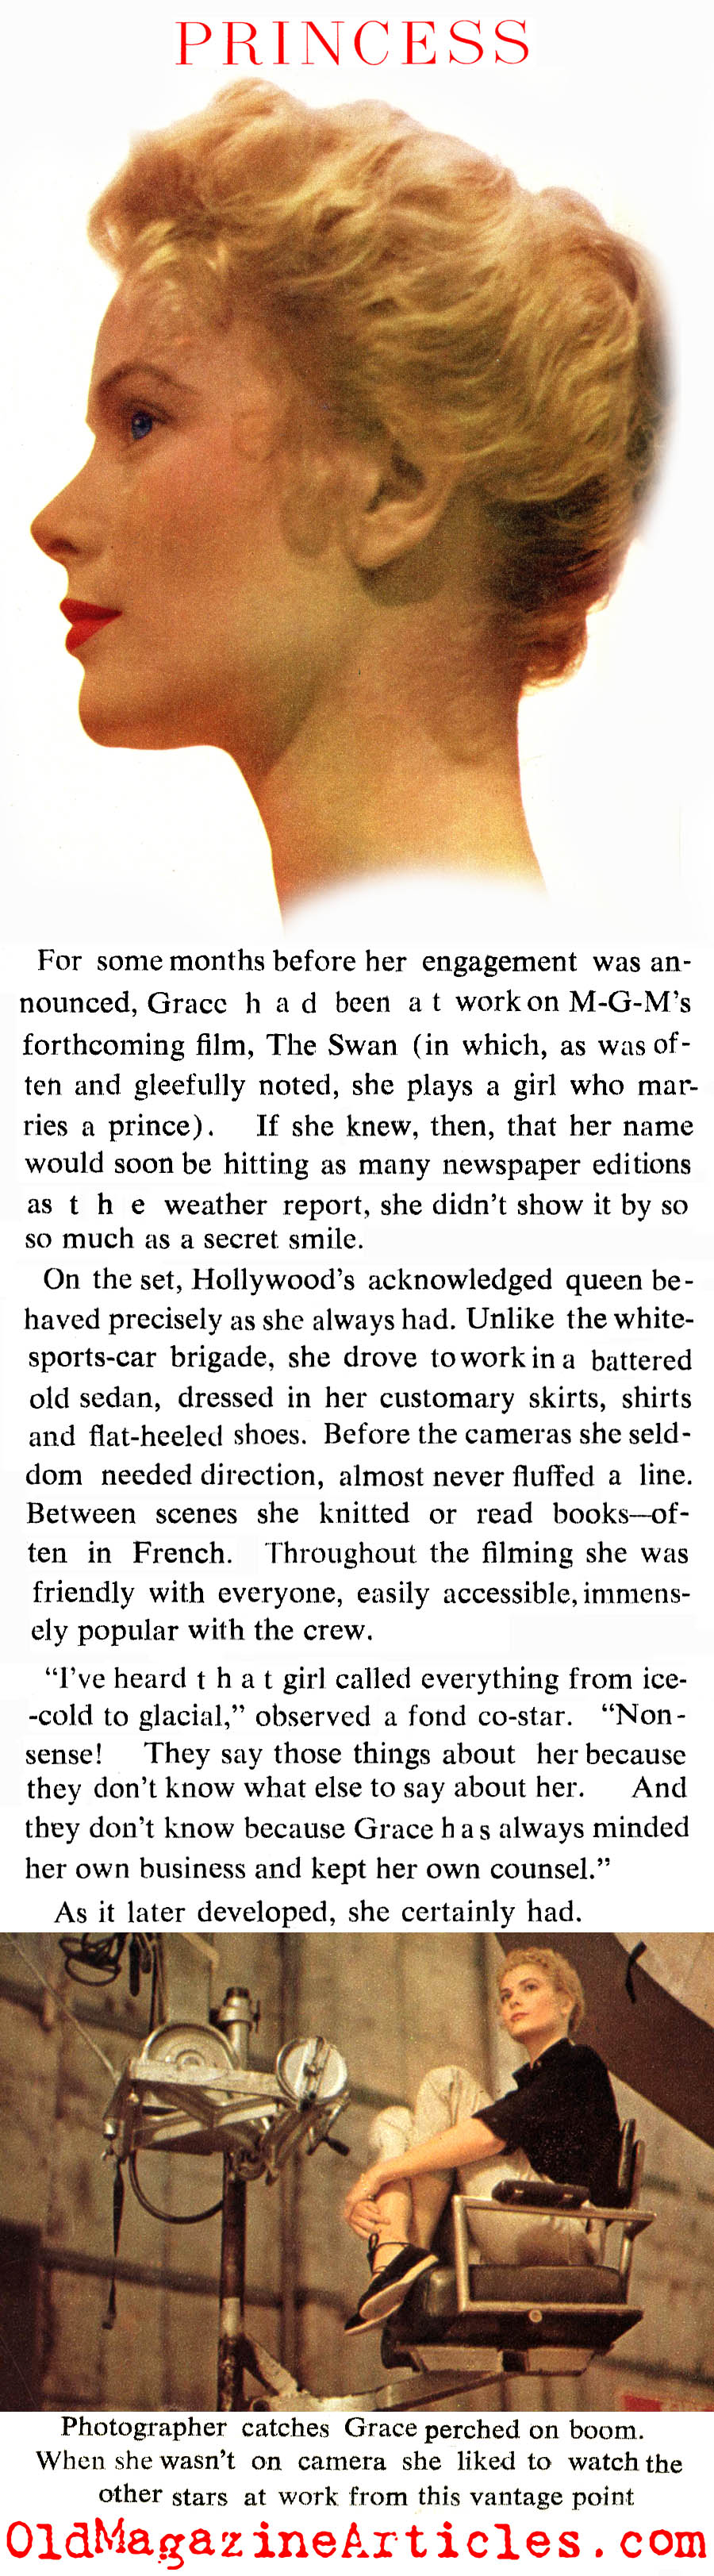 Leaving Hollywood (Collier's Magazine, 1956)